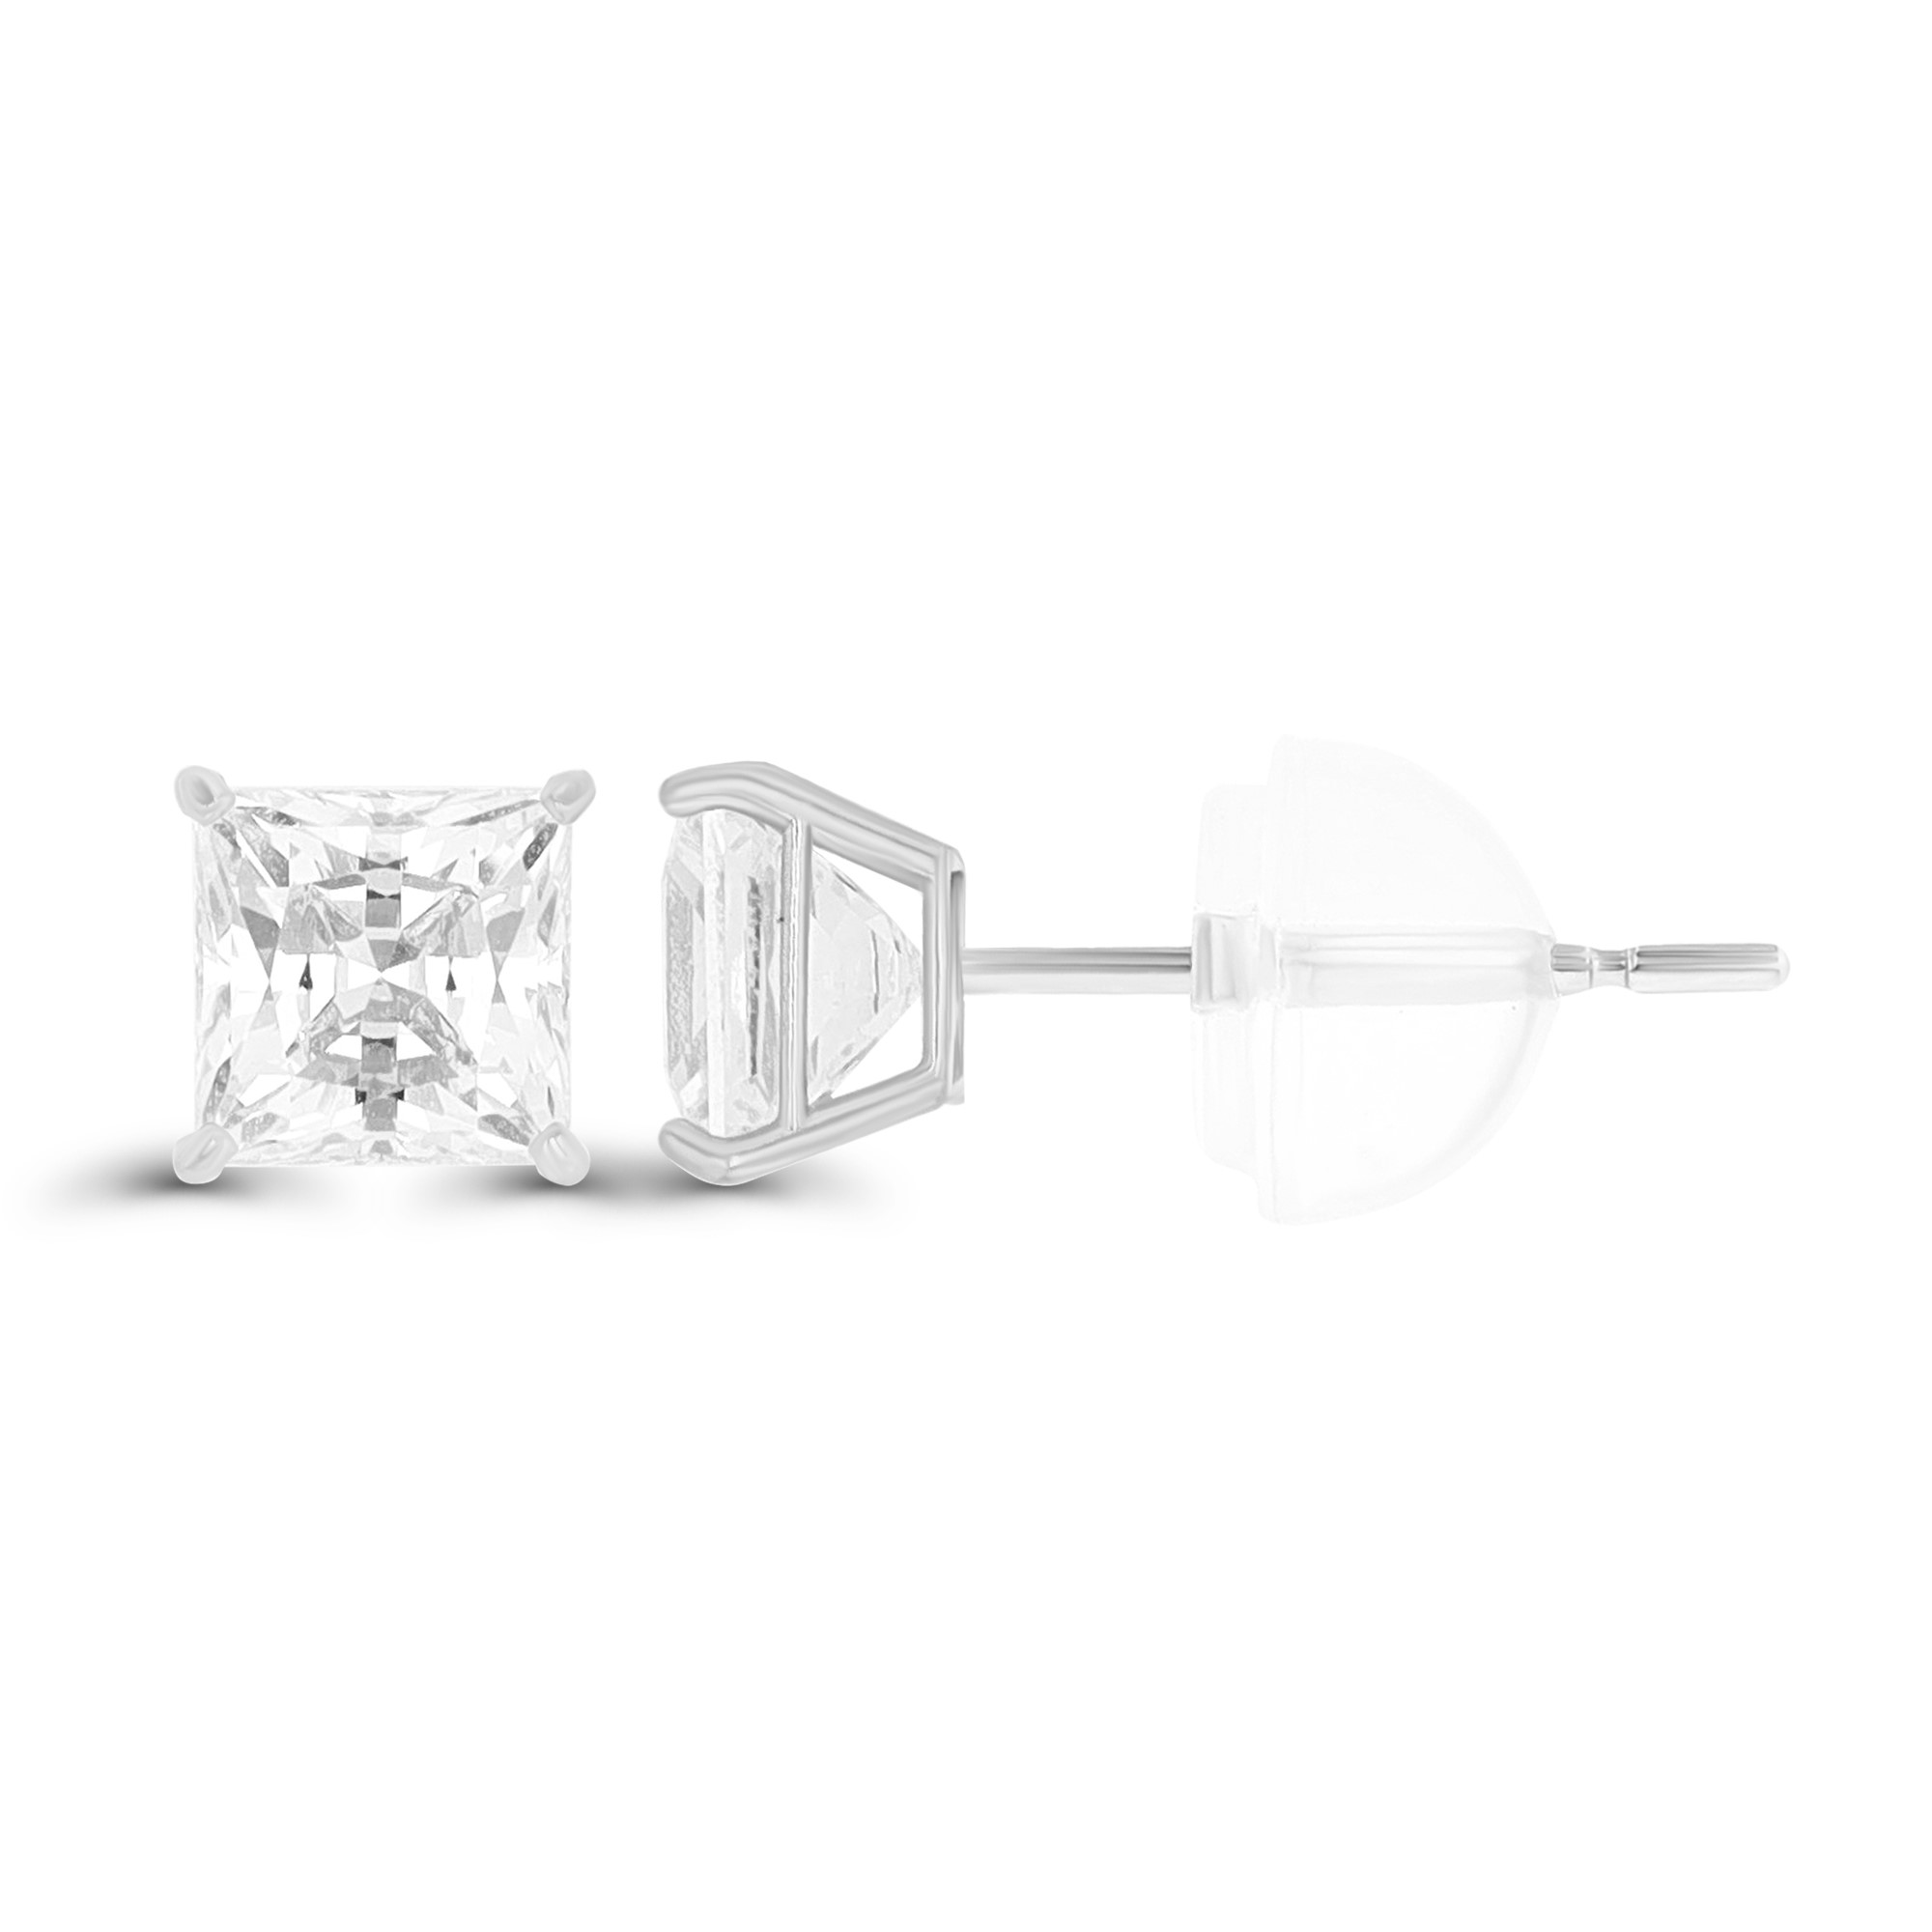 14K White Gold 5mm Sq White Swarovski Zirconia 4-Prong Cast Basket Solitaire Earring & Silicone Bubble Back